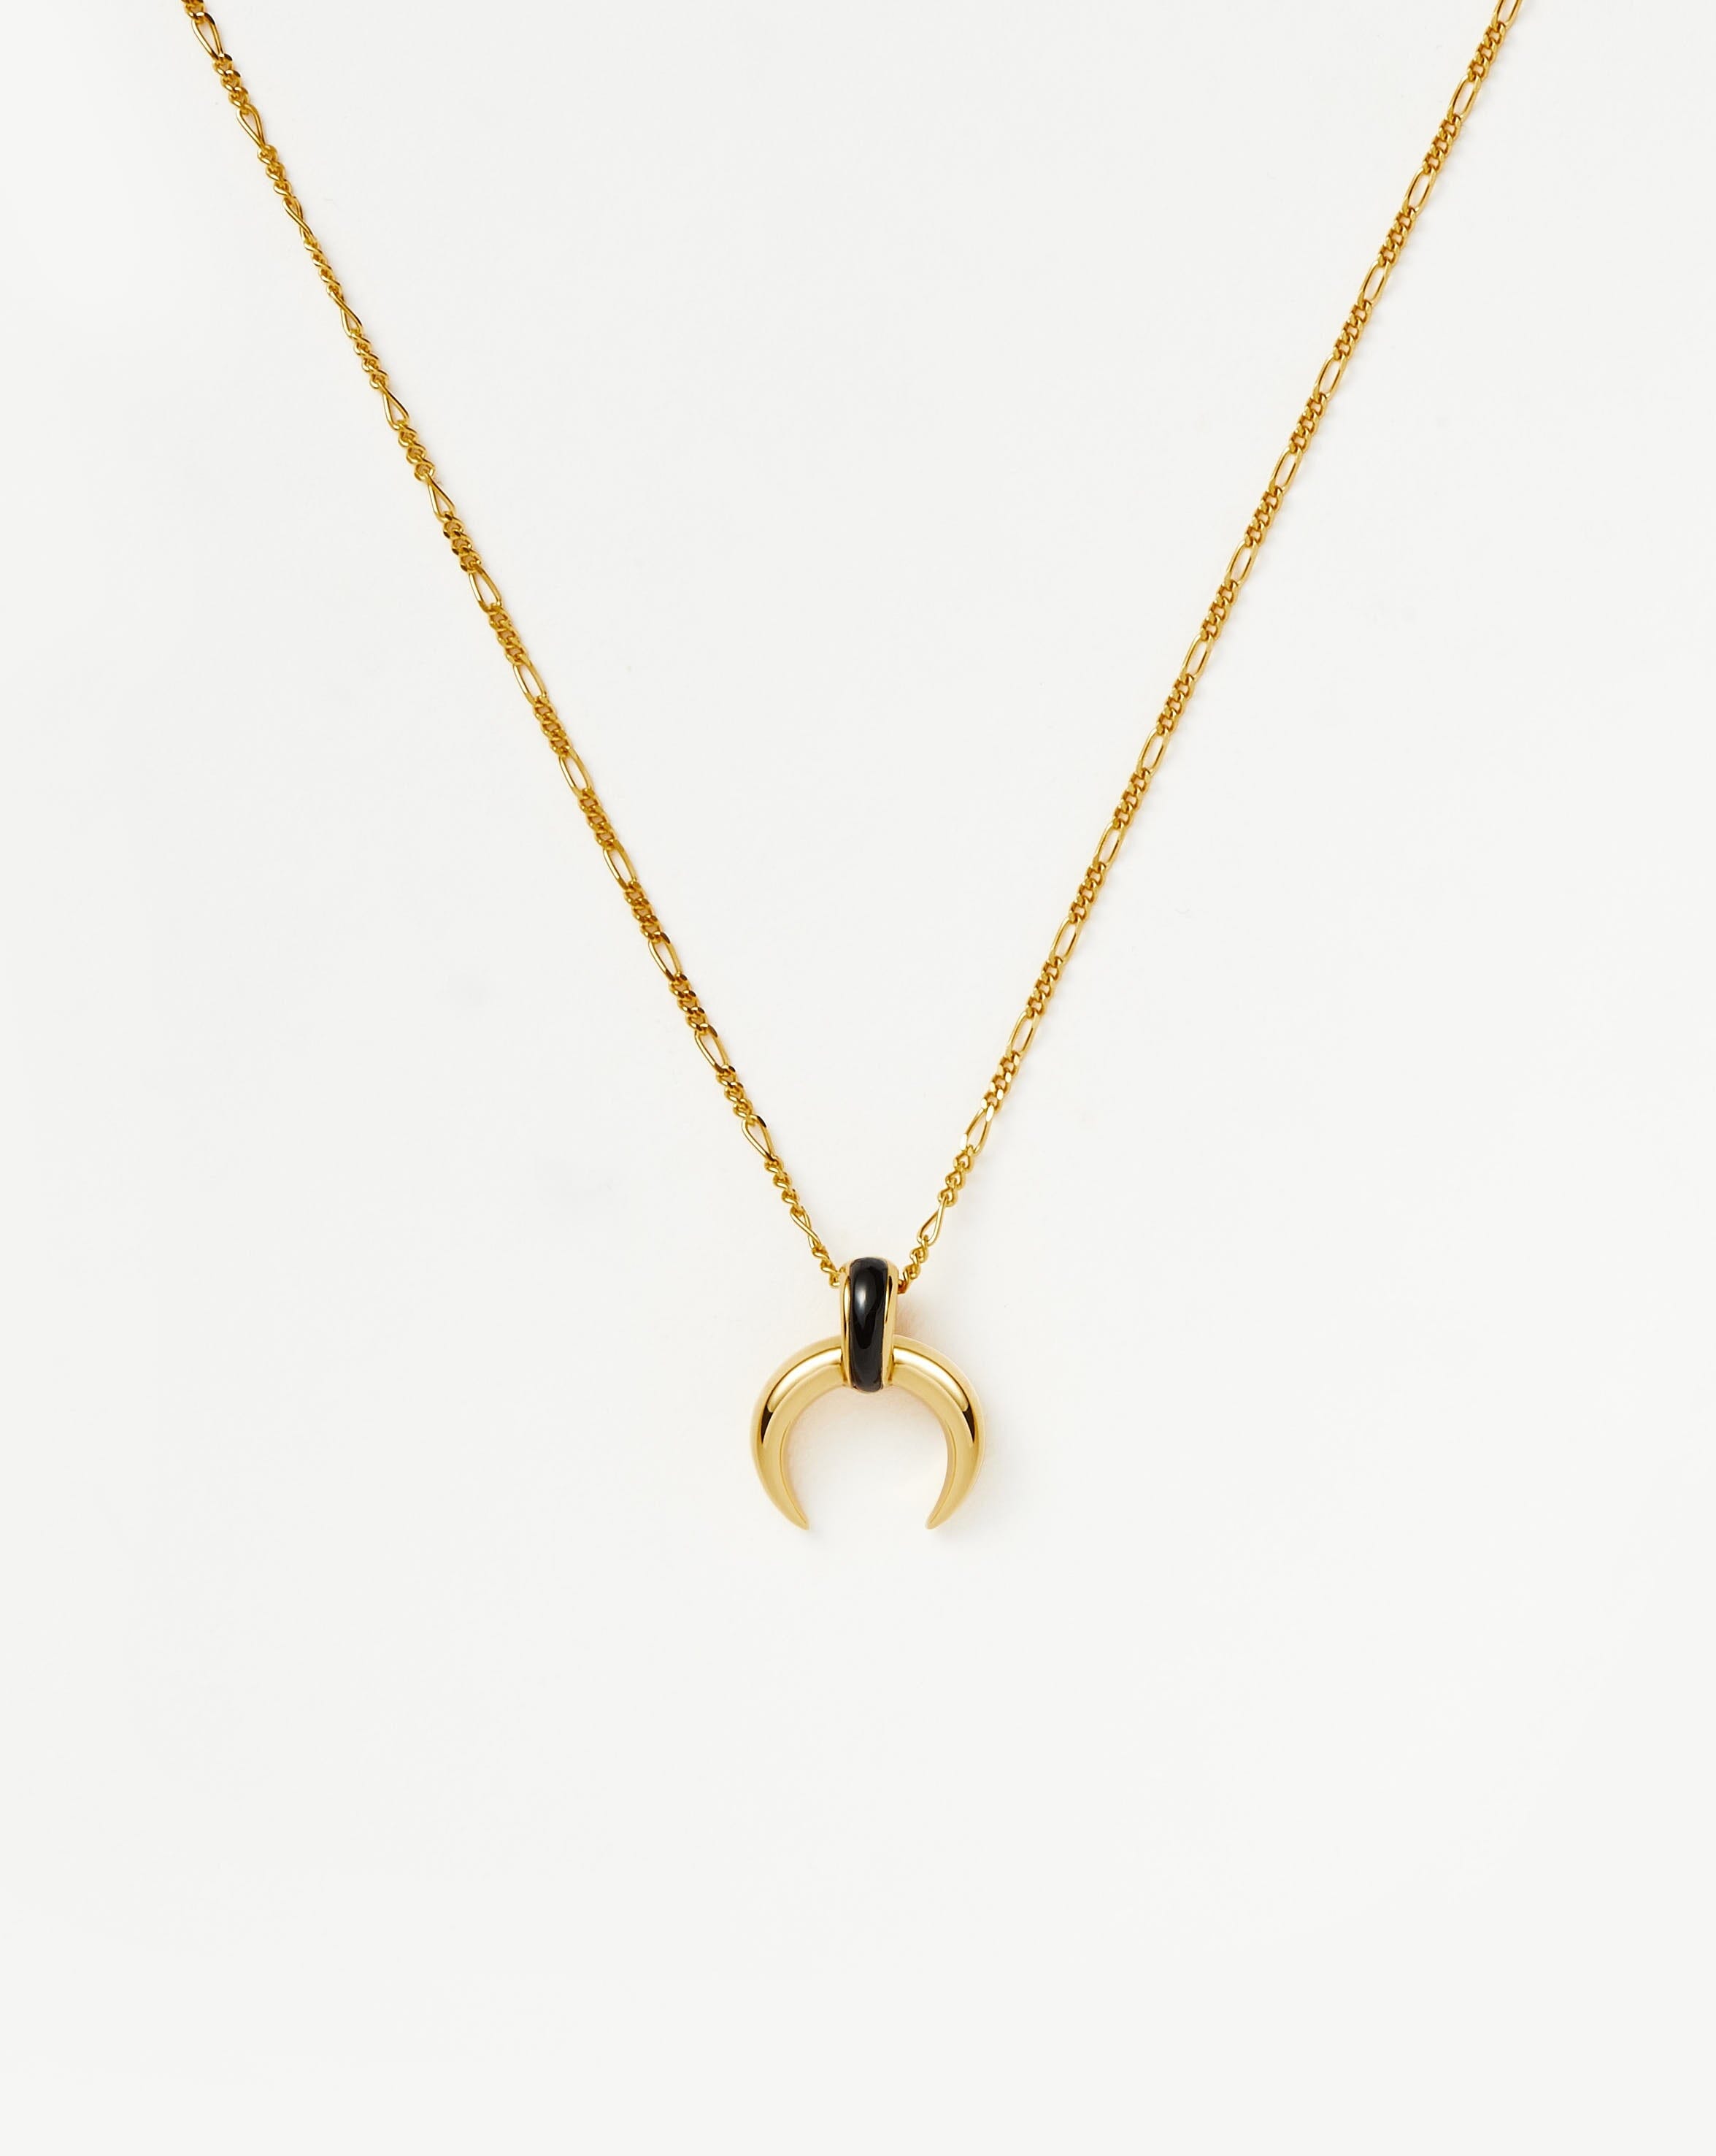 Lucy Williams Black Onyx Horn Pendant Necklace | 18ct Gold Plated Vermeil/Black Onyx Necklaces Missoma 